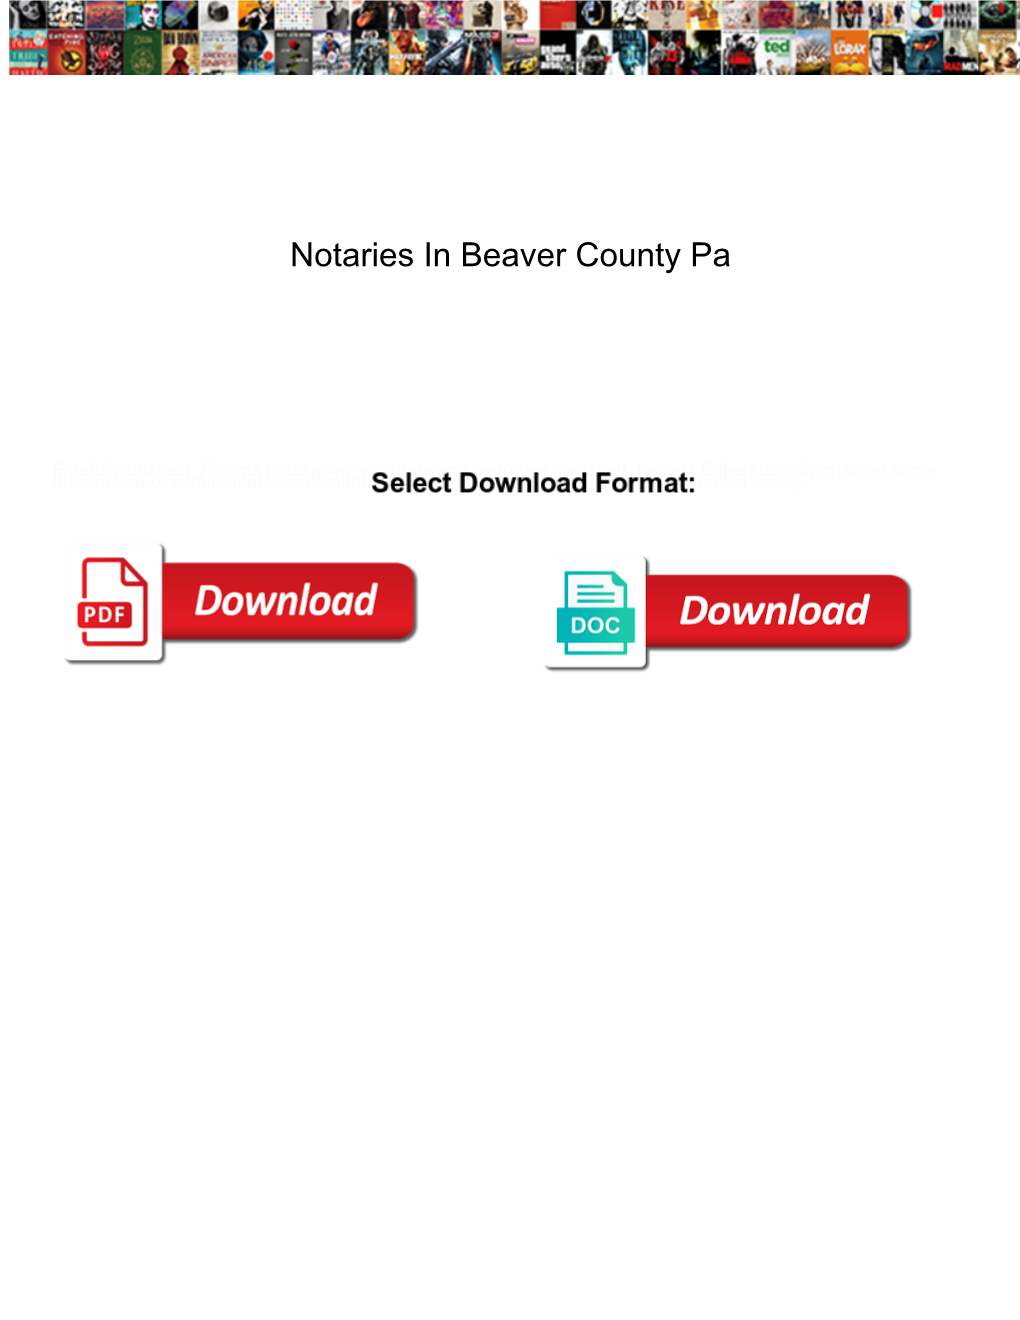 Notaries in Beaver County Pa